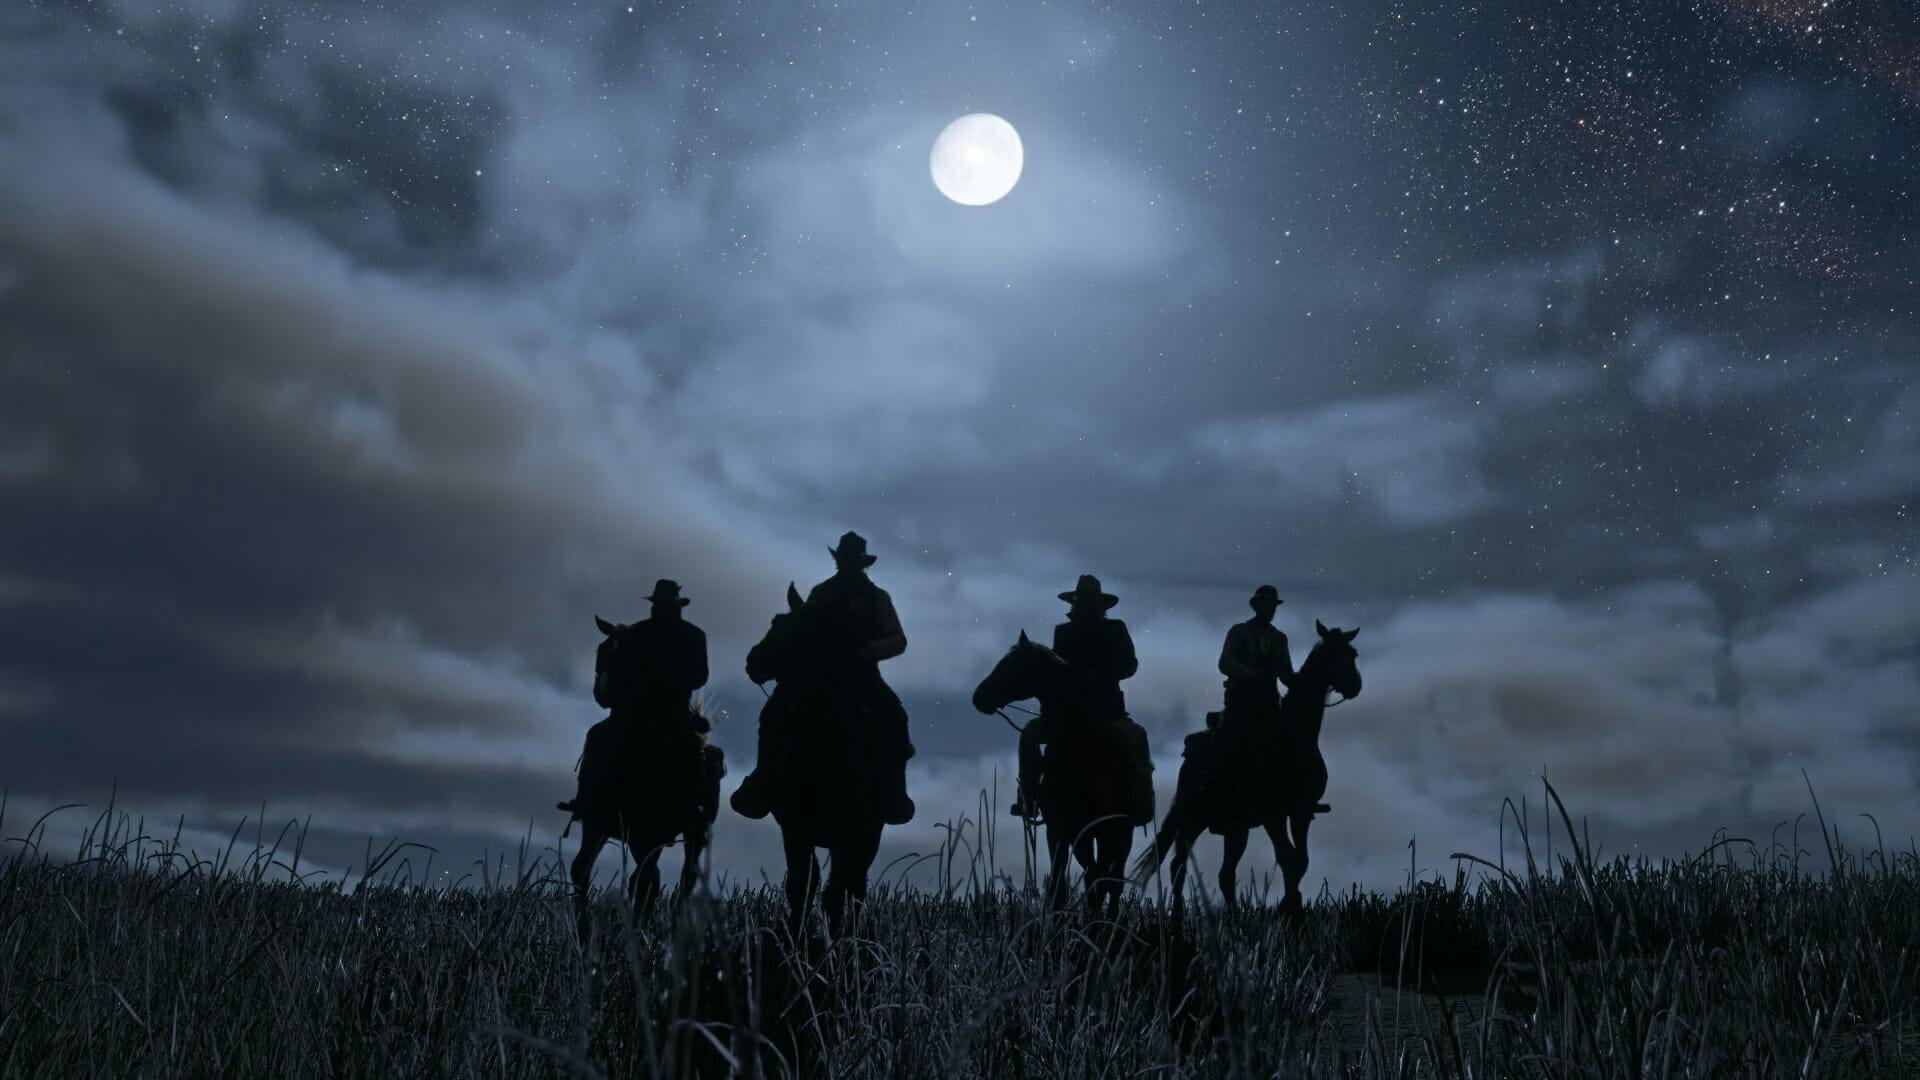 Red Dead Redemption 2 microtransactions